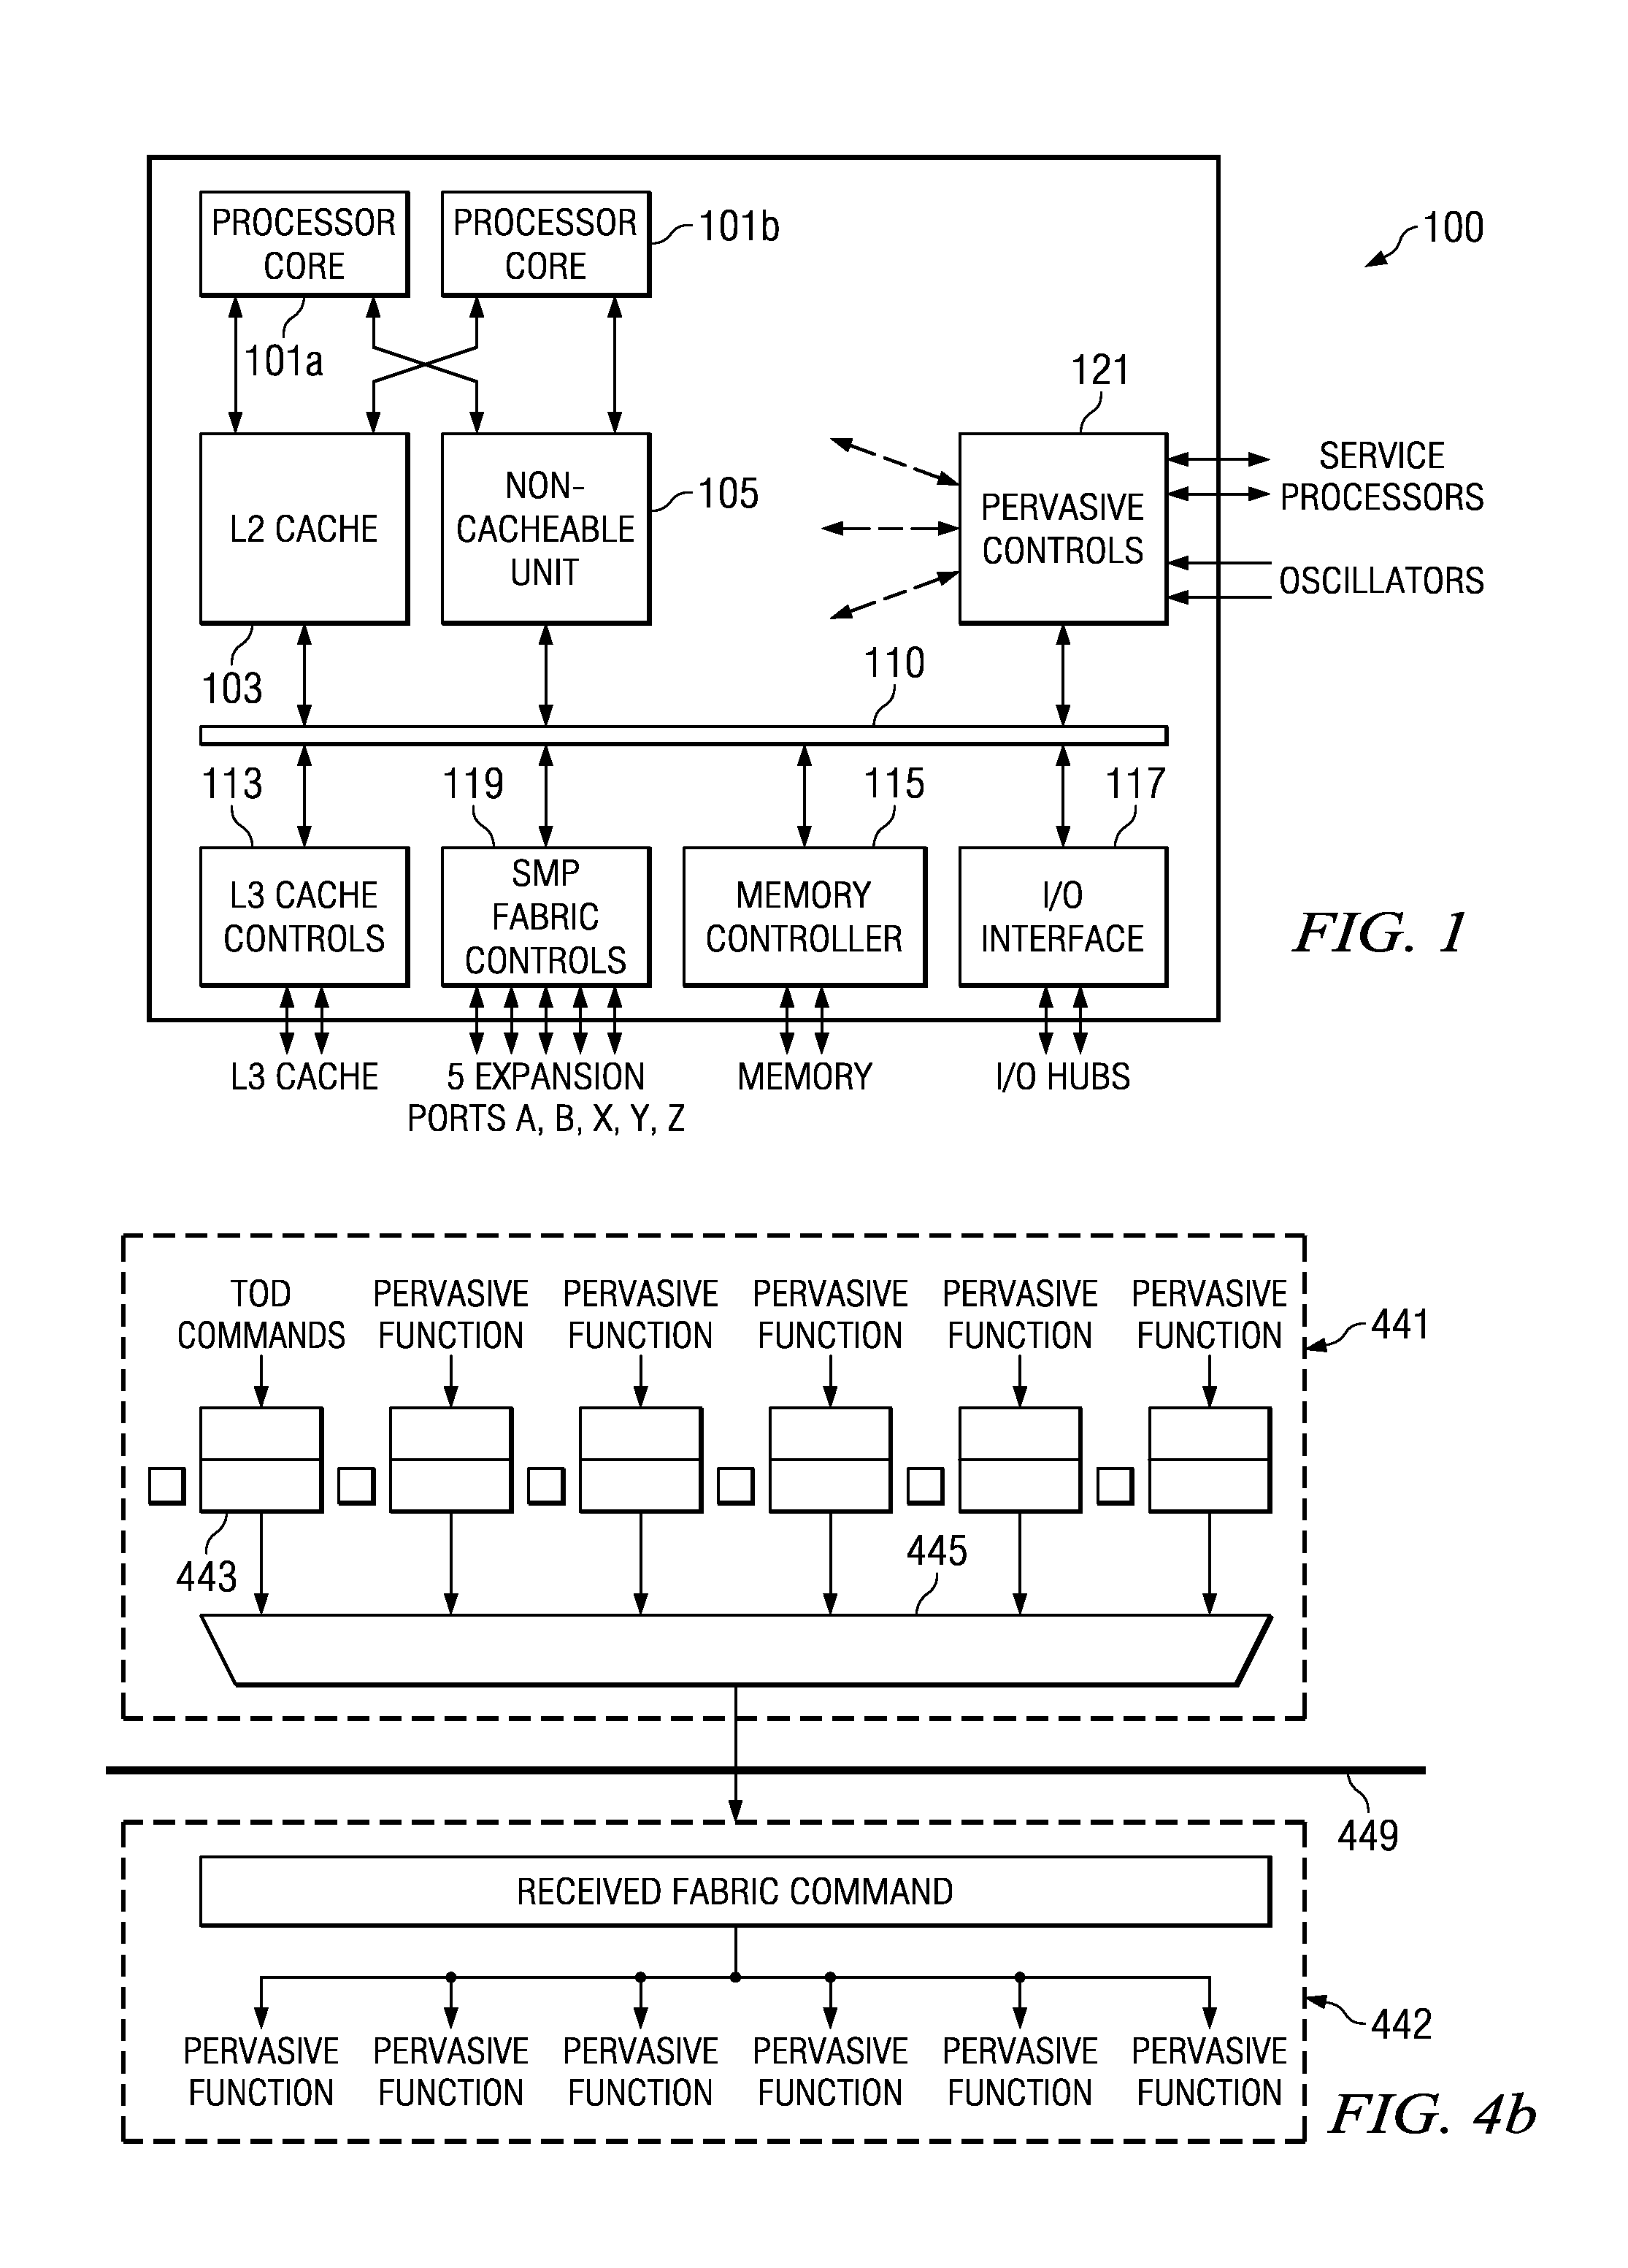 Method for Fault Tolerant Time Synchronization Mechanism in a Large Scaleable Multi-Processor Computer